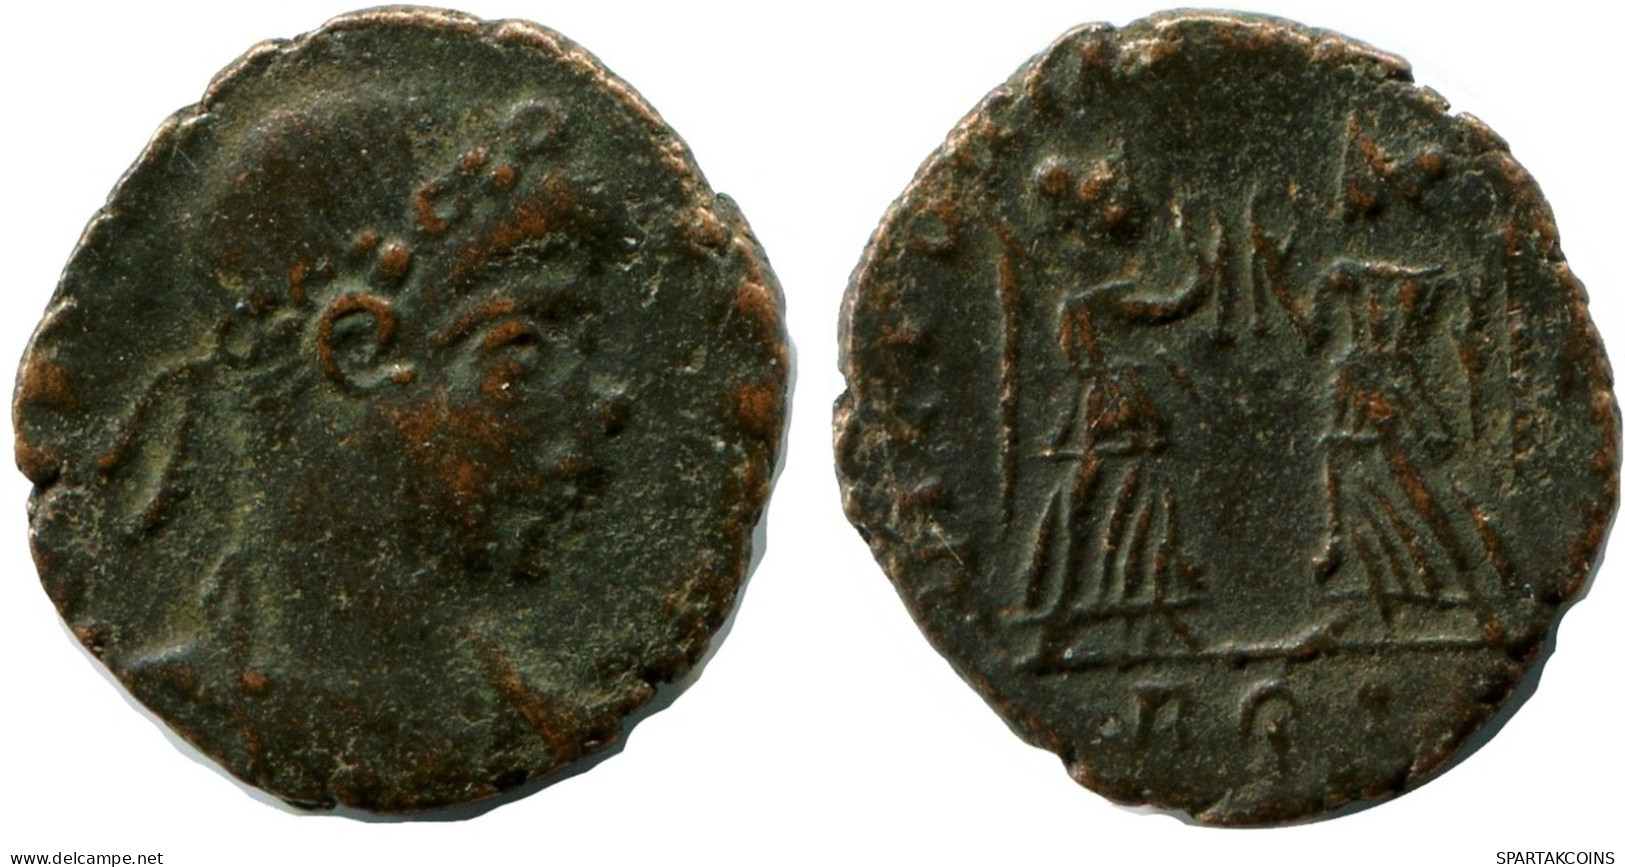 CONSTANS MINTED IN ROME ITALY FOUND IN IHNASYAH HOARD EGYPT #ANC11515.14.U.A - El Imperio Christiano (307 / 363)